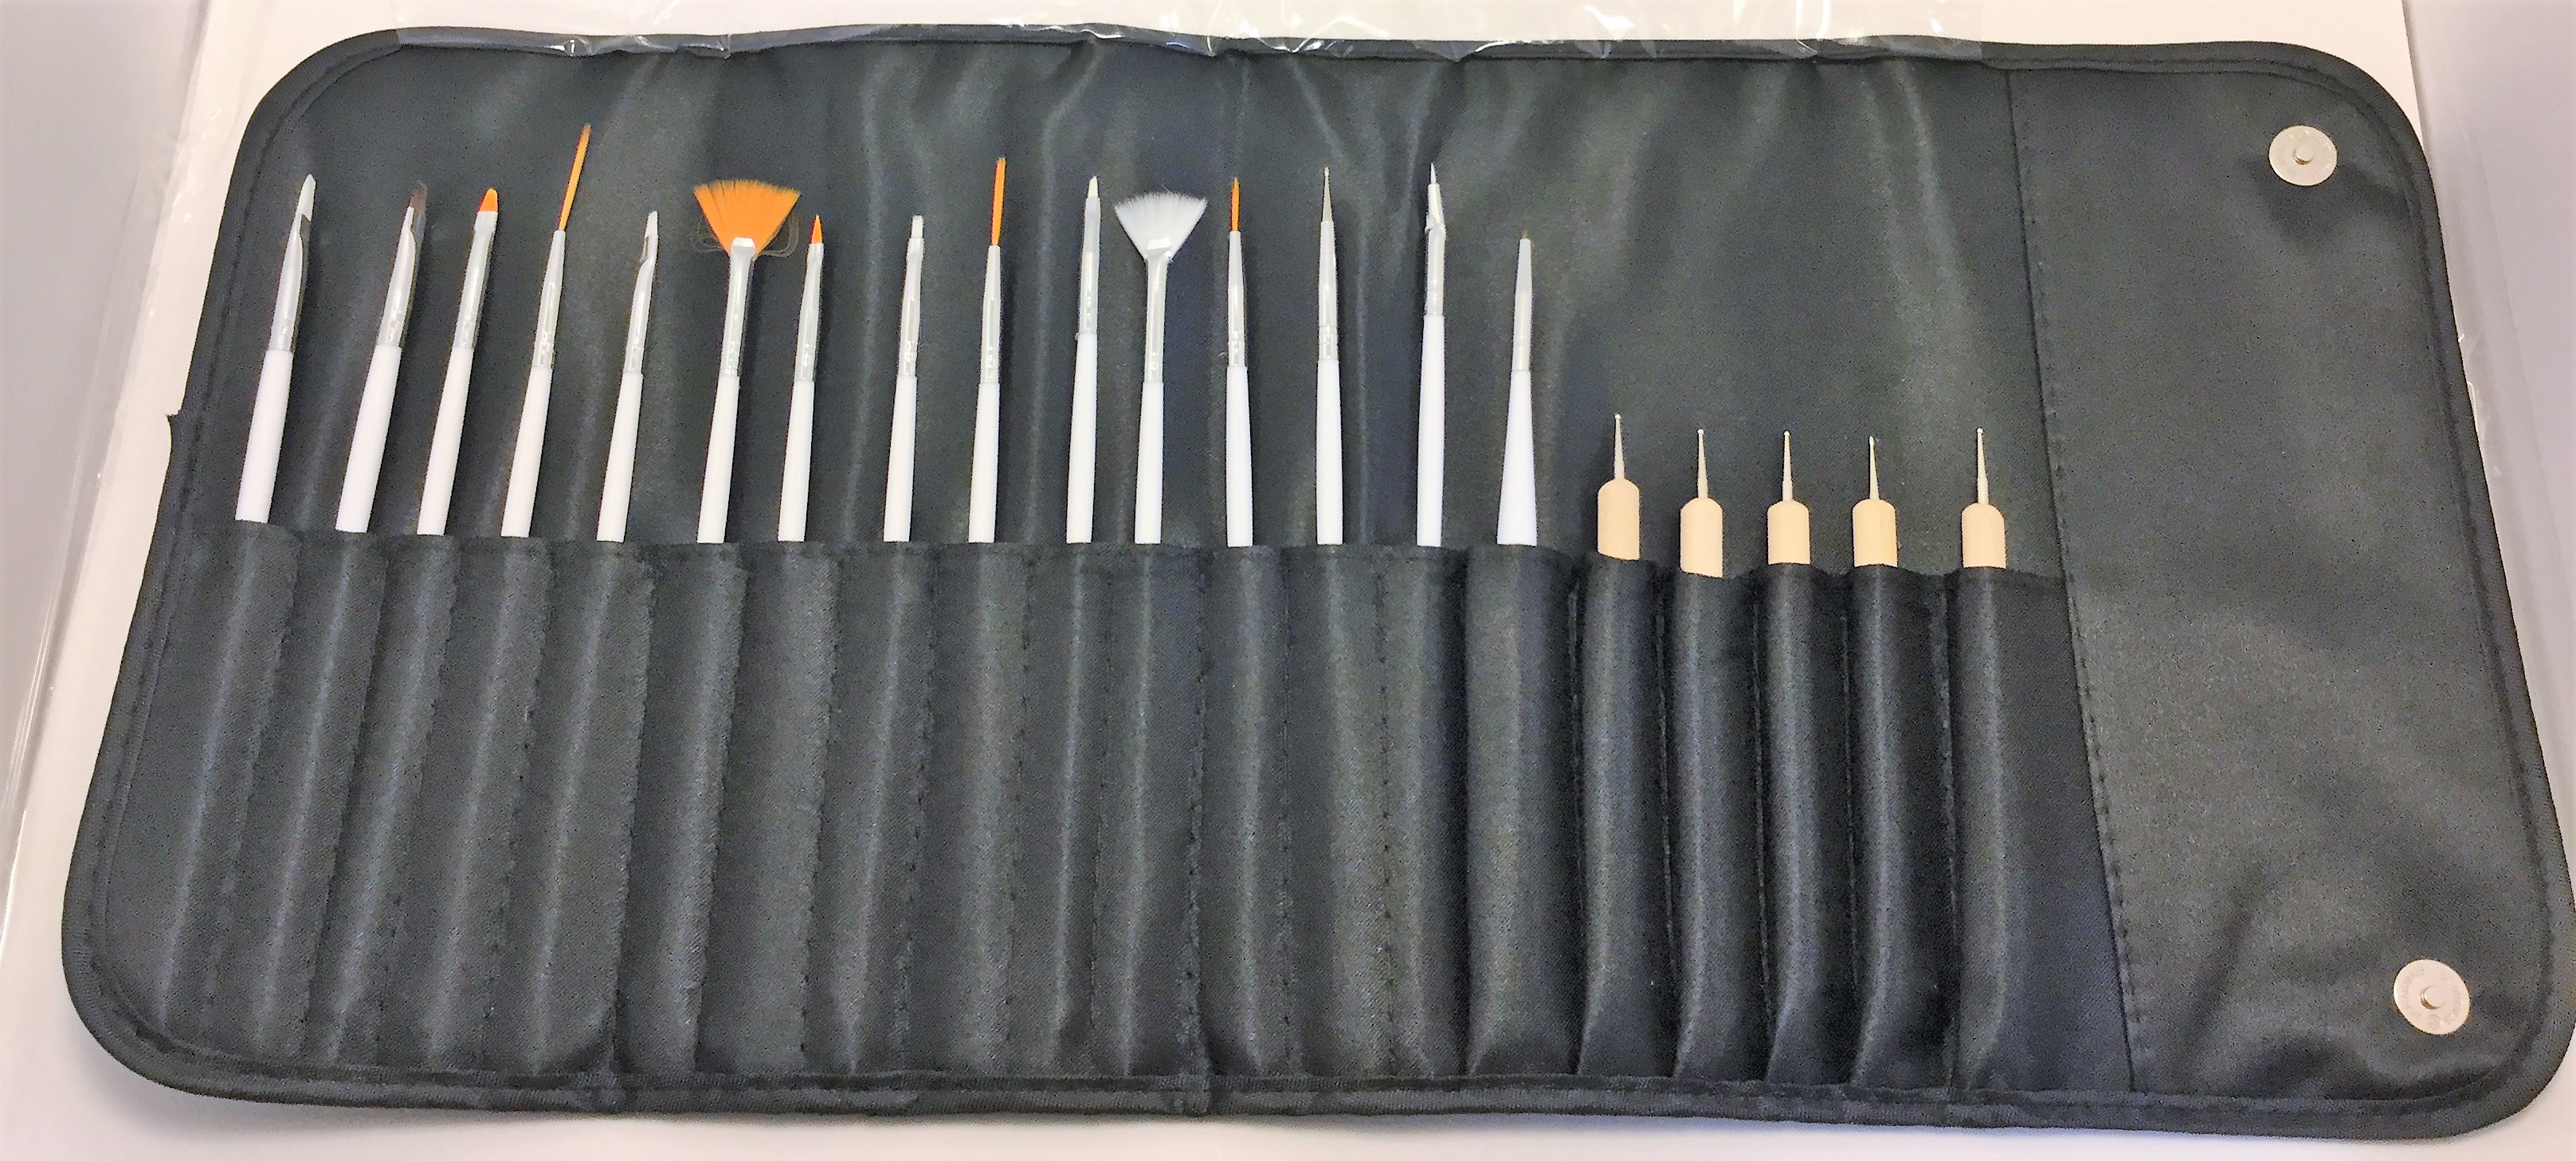 great set of brushes